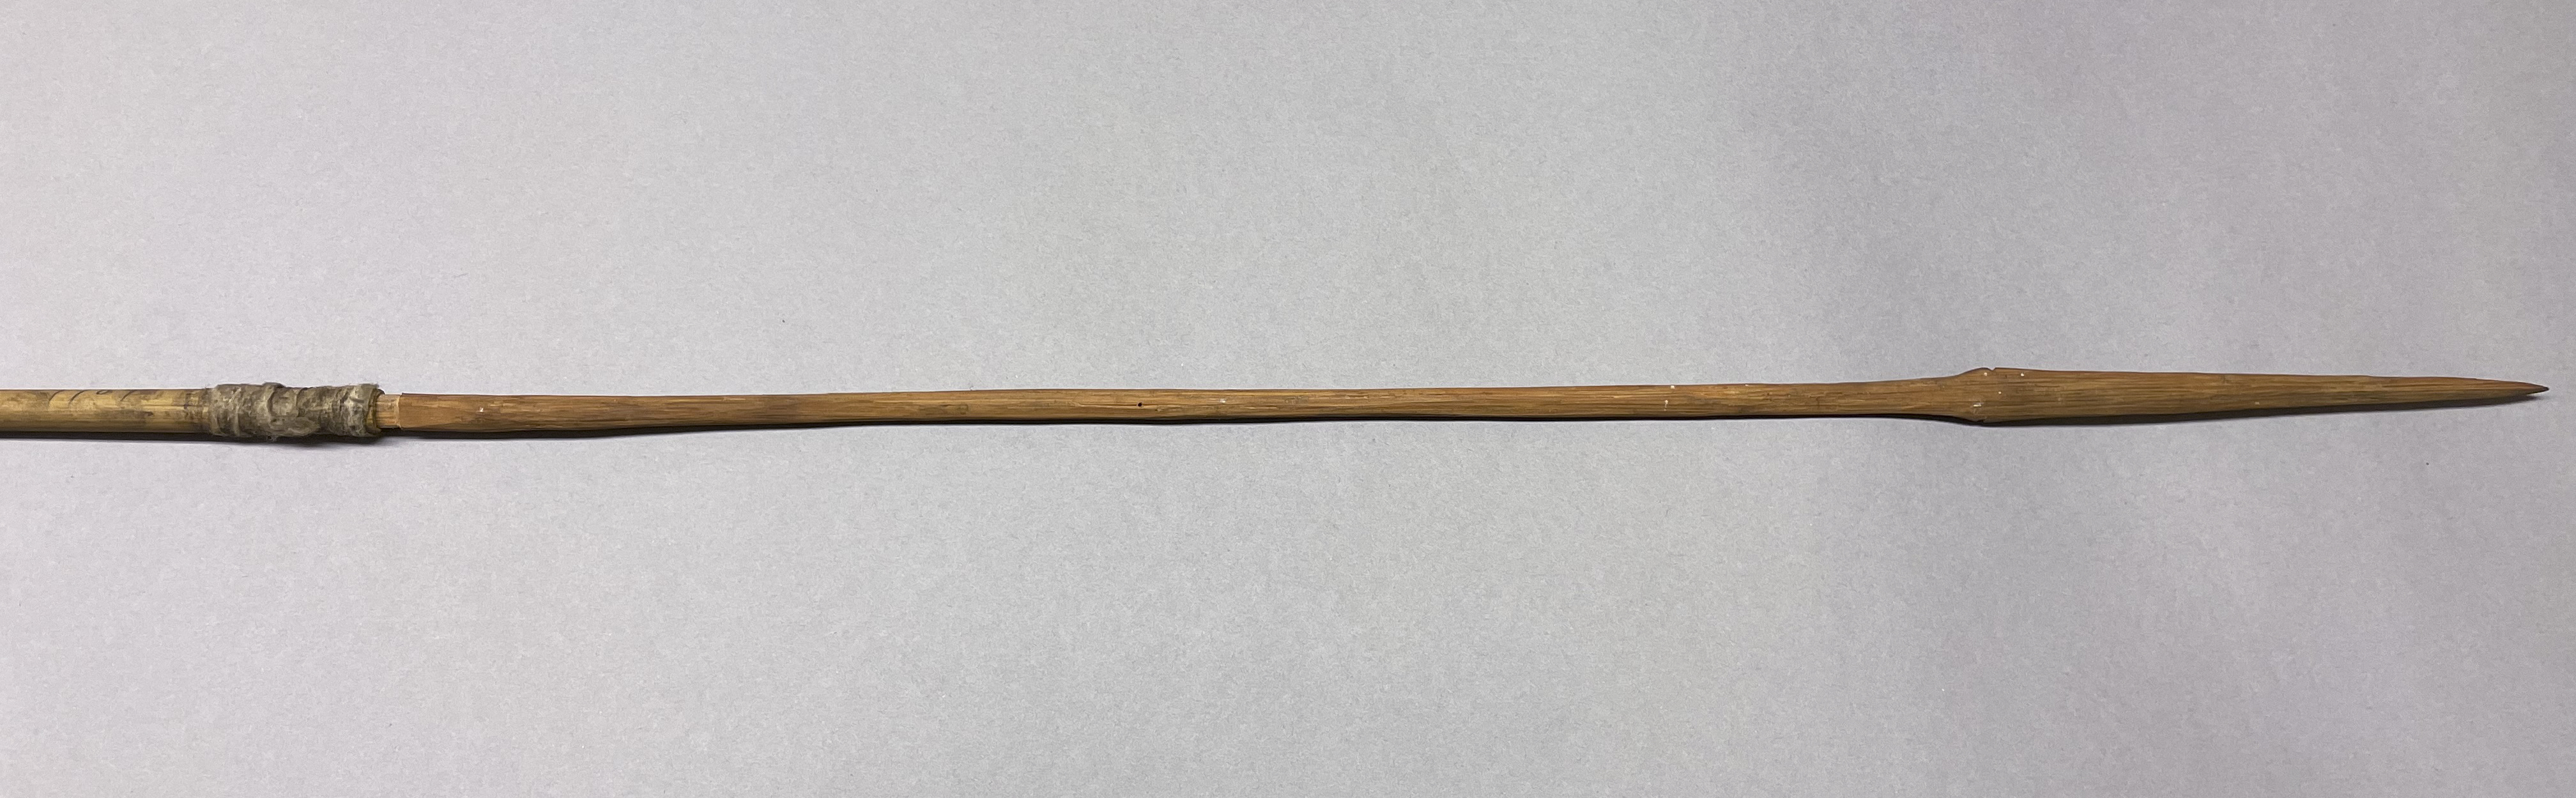 detail view of arrow (c) Field Museum of Natural History - CC BY-NC 4.0